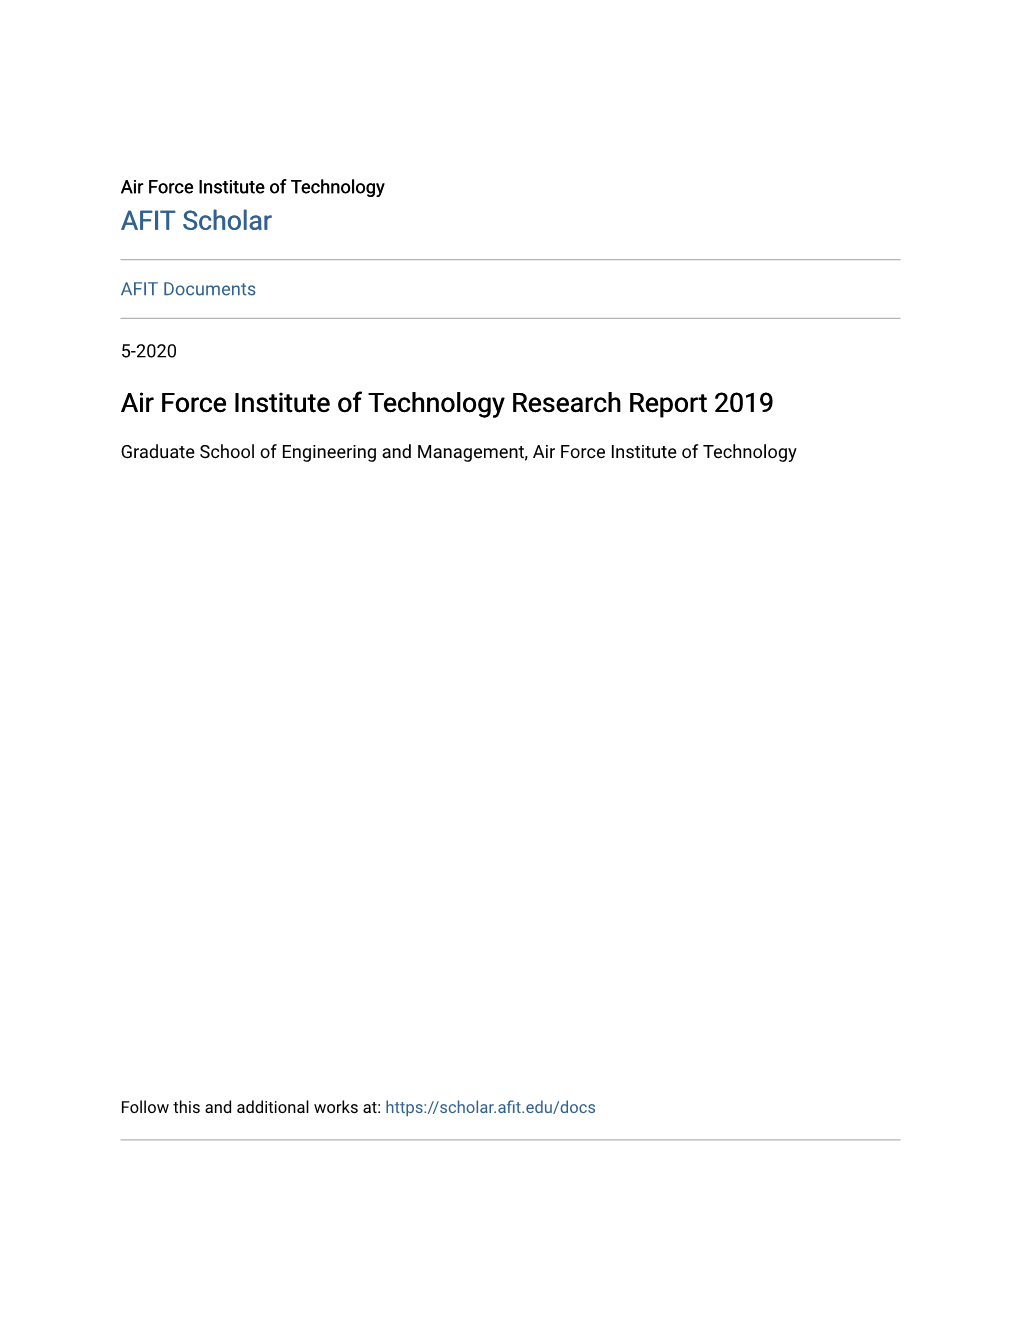 Air Force Institute of Technology Research Report 2019